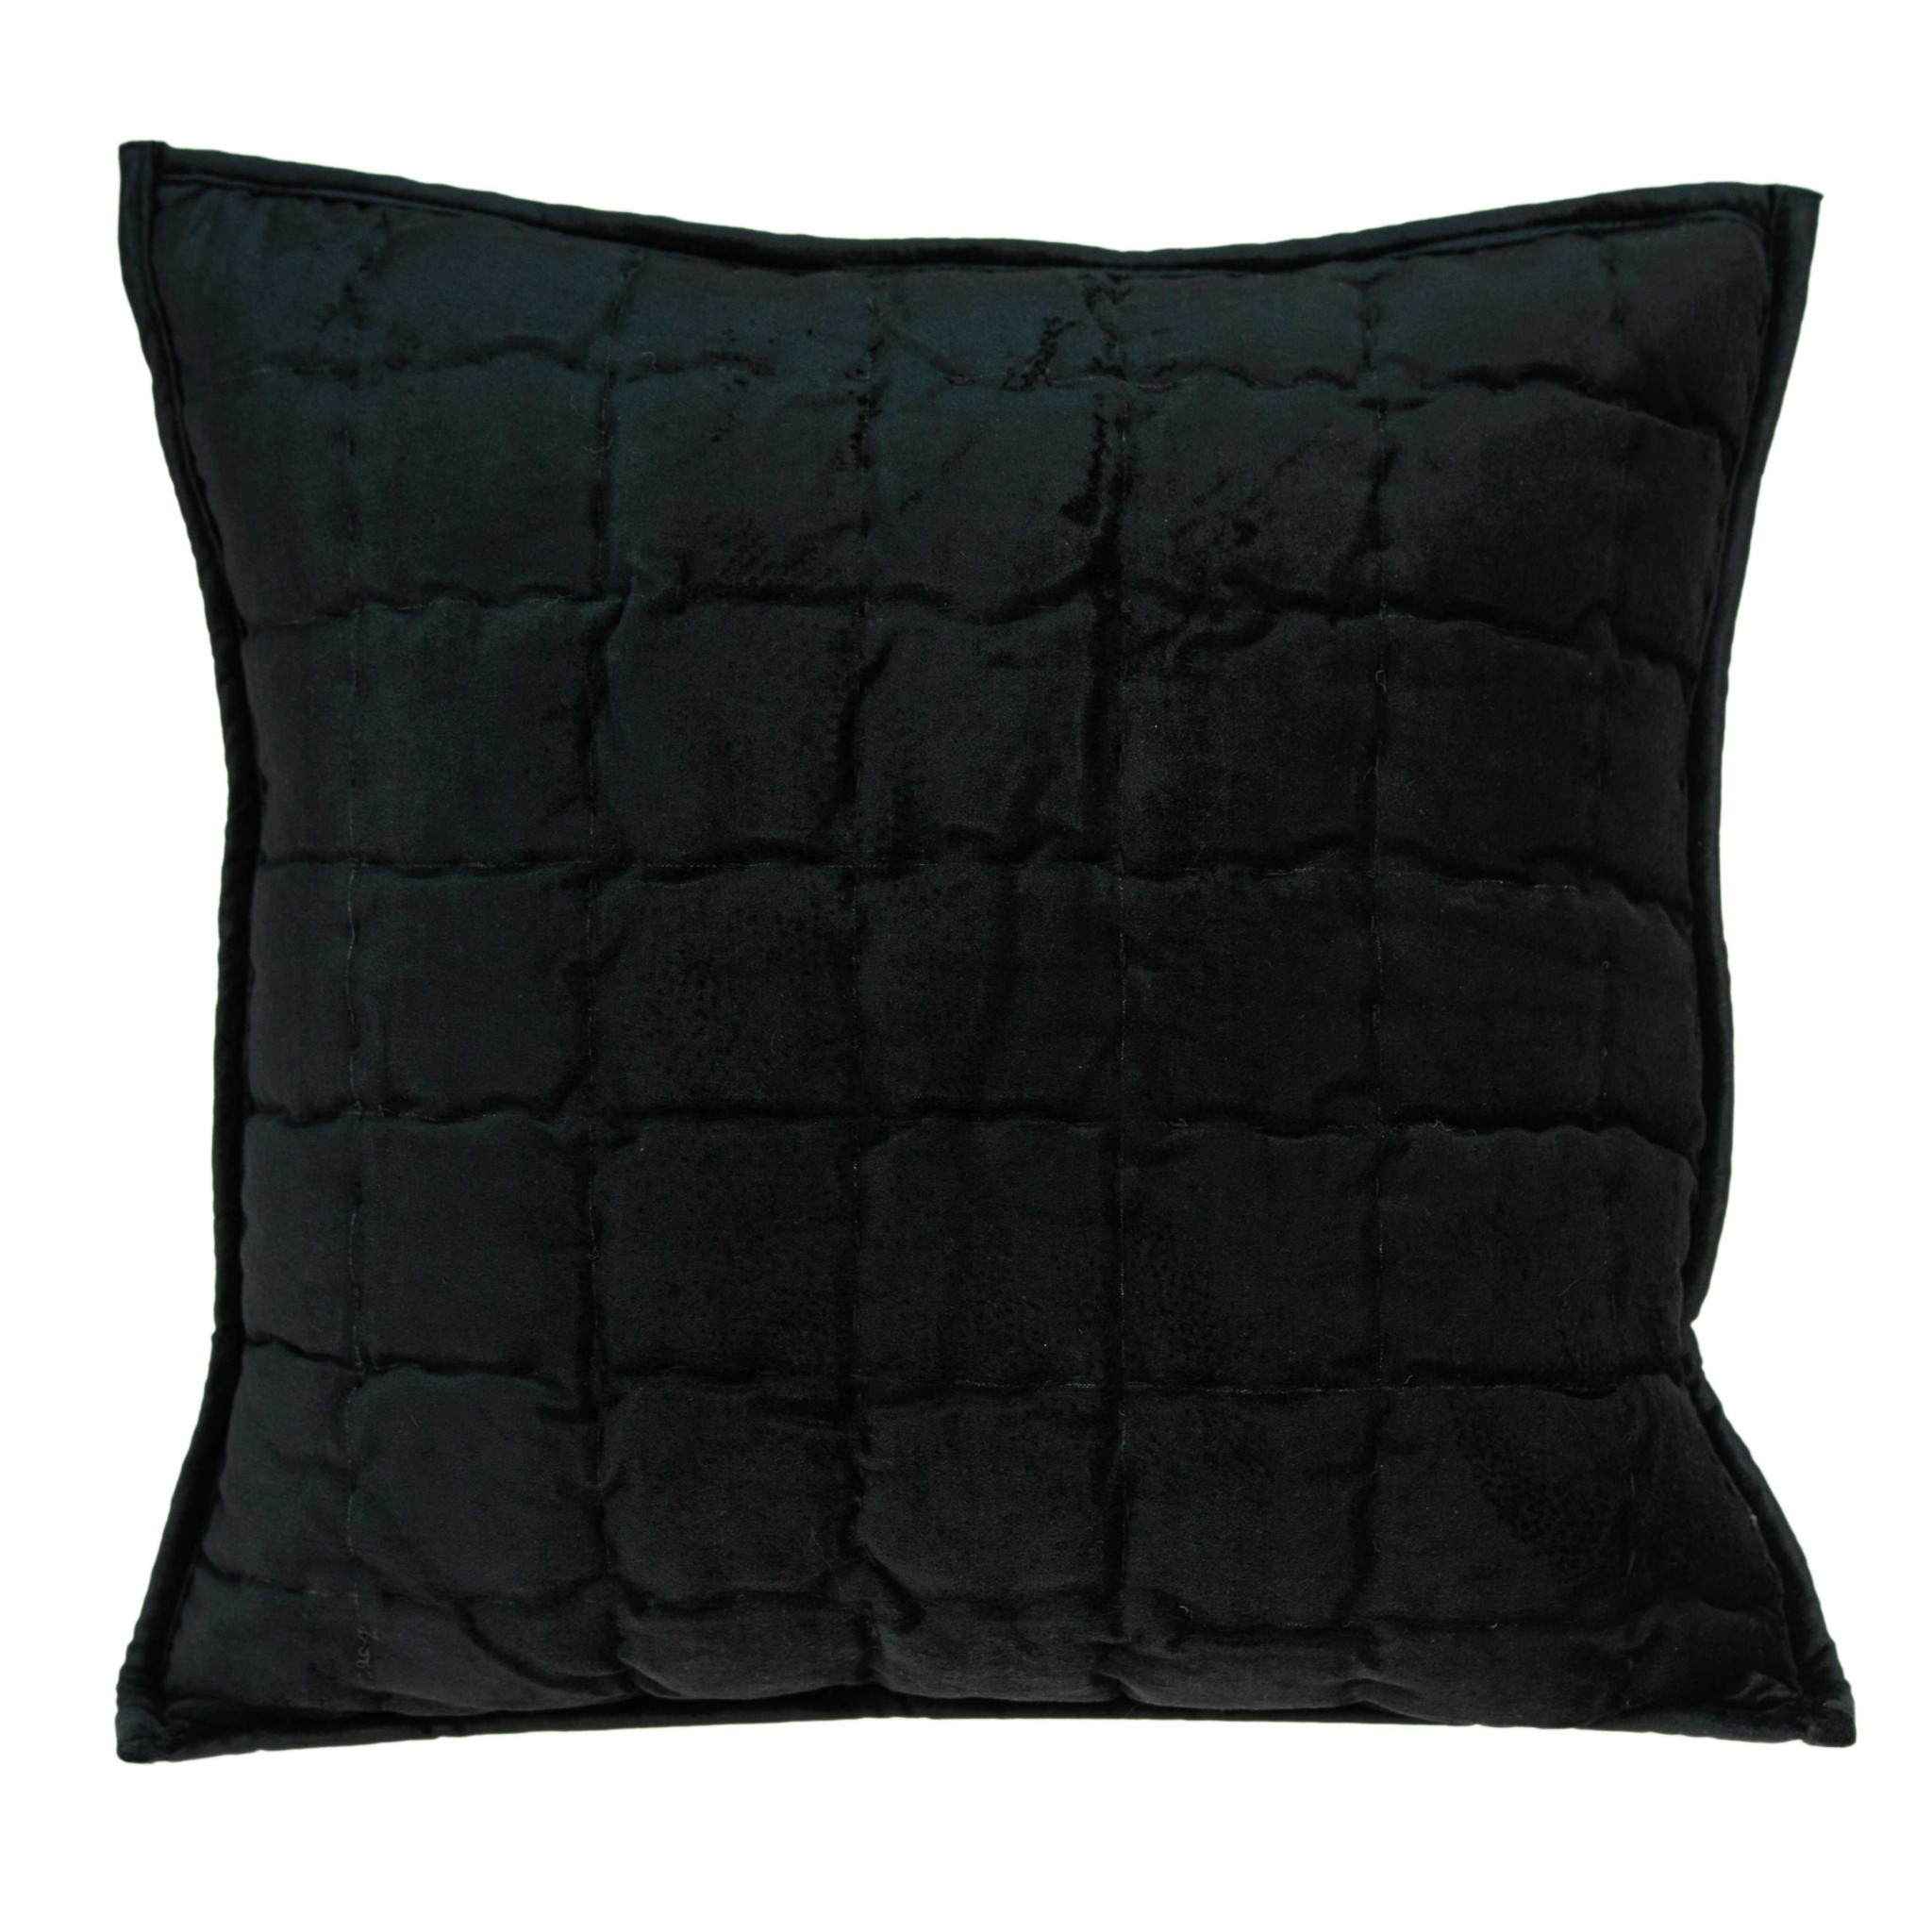 20" x 0.5" x 20" Transitional Black Solid Quilted Pillow Cover